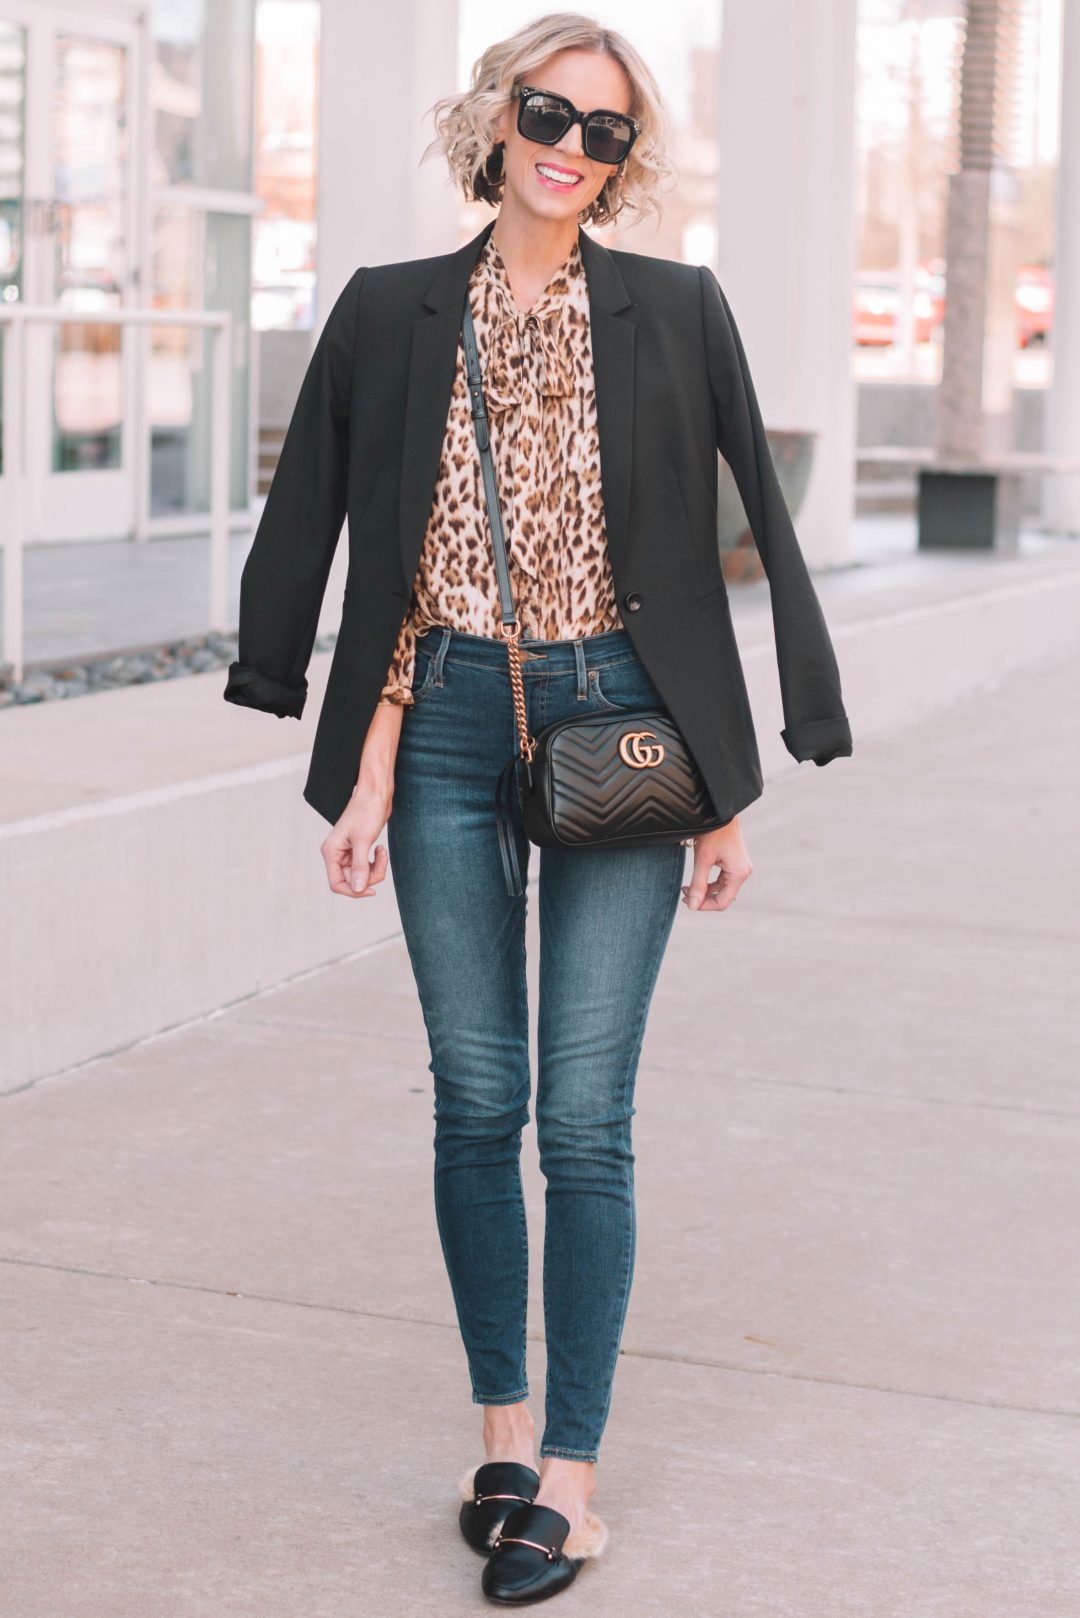 3 Ways to Wear 1 Leopard Blouse - Straight A Style